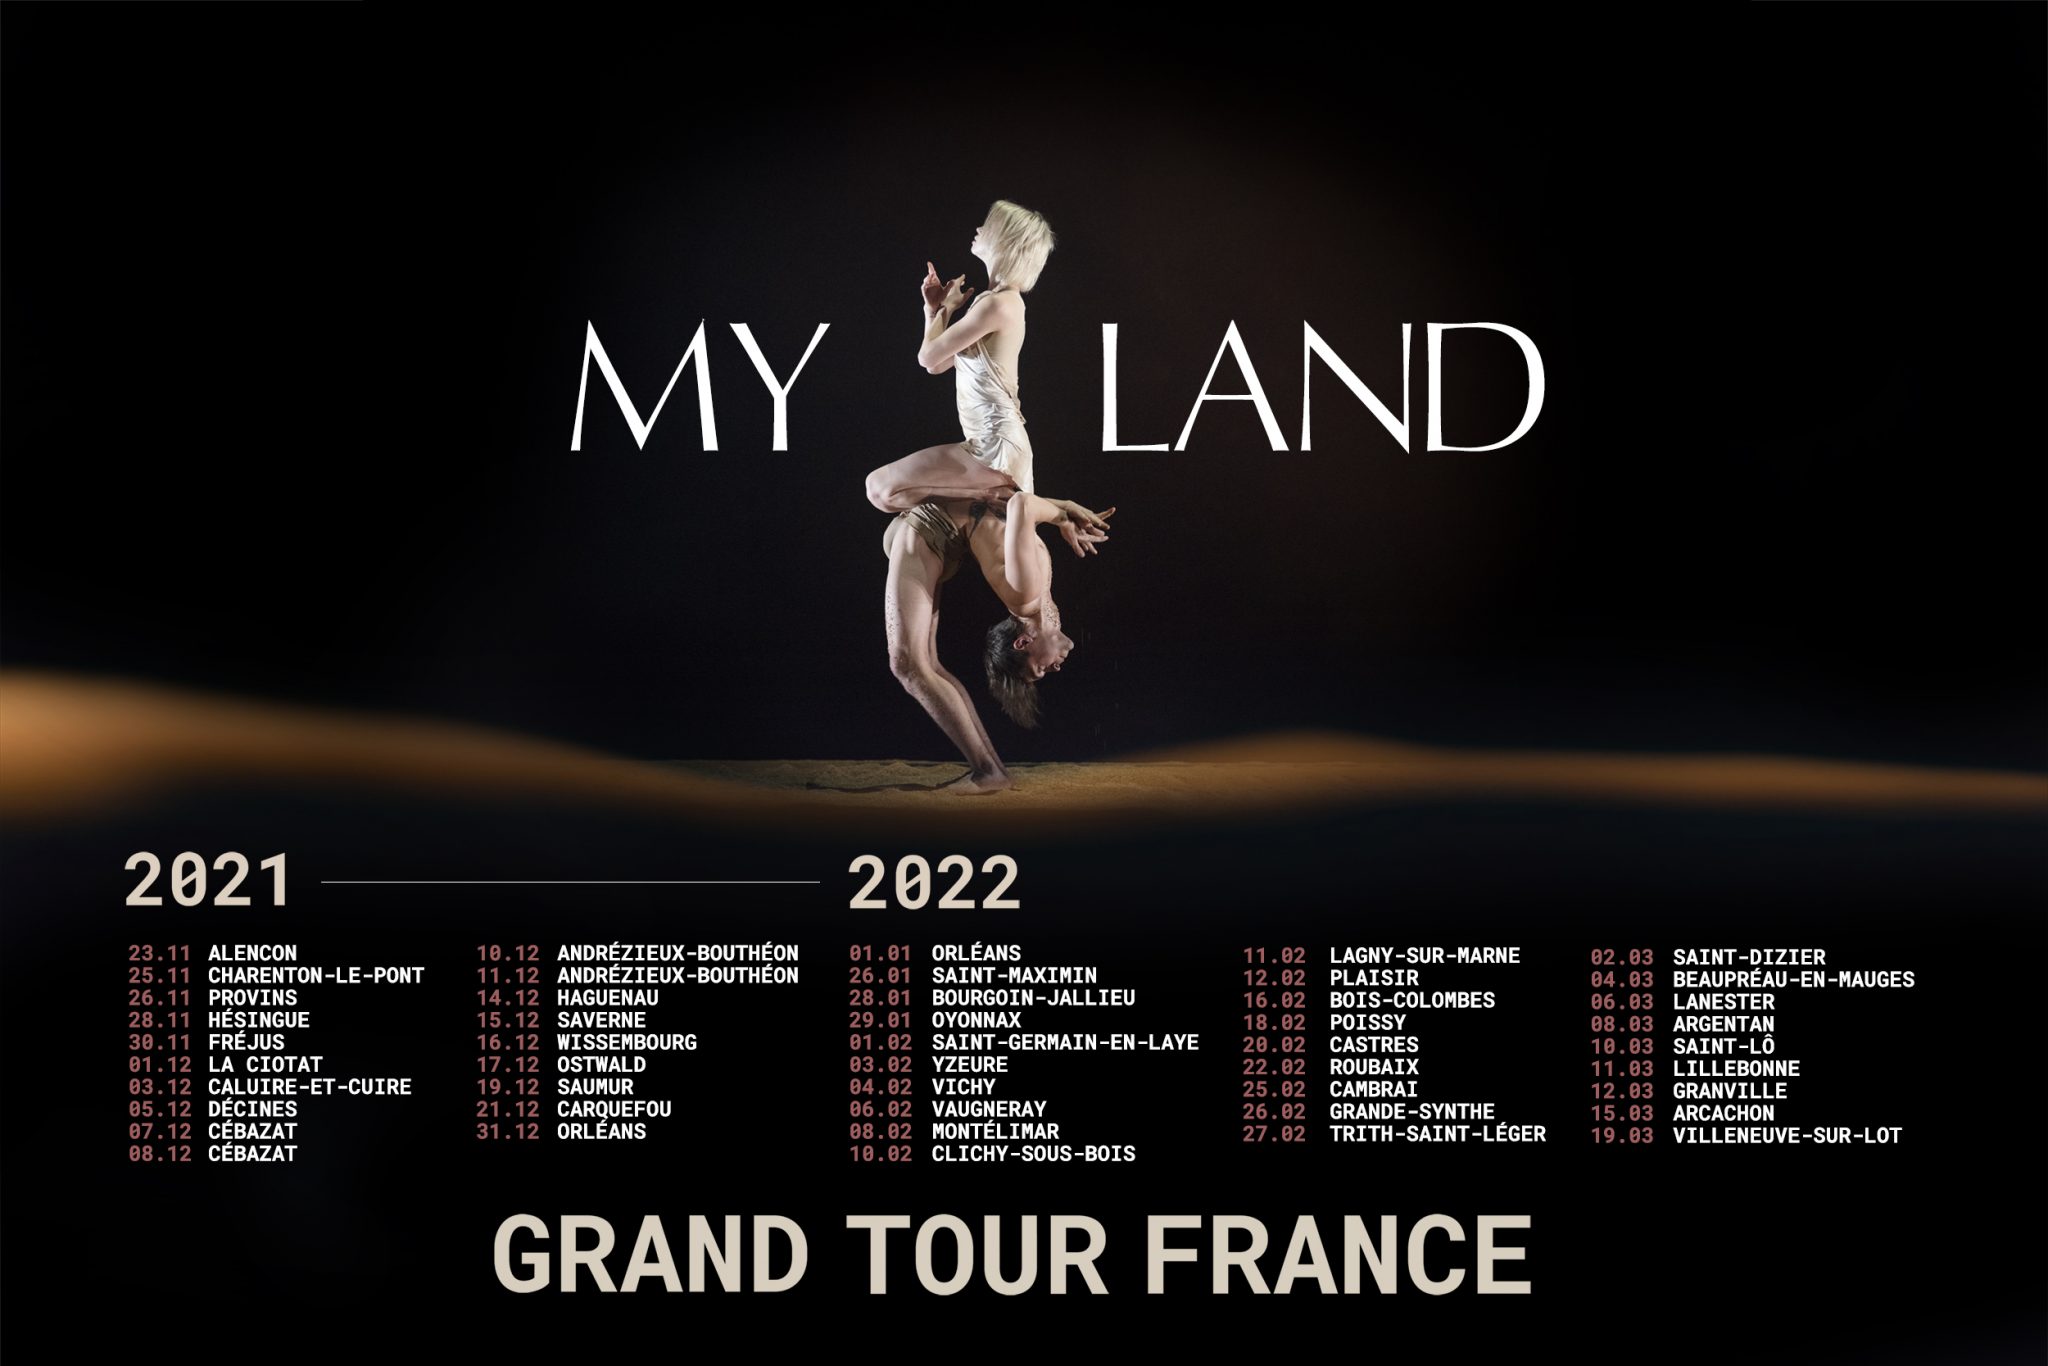 My Land premiers in over 40 theatres around France